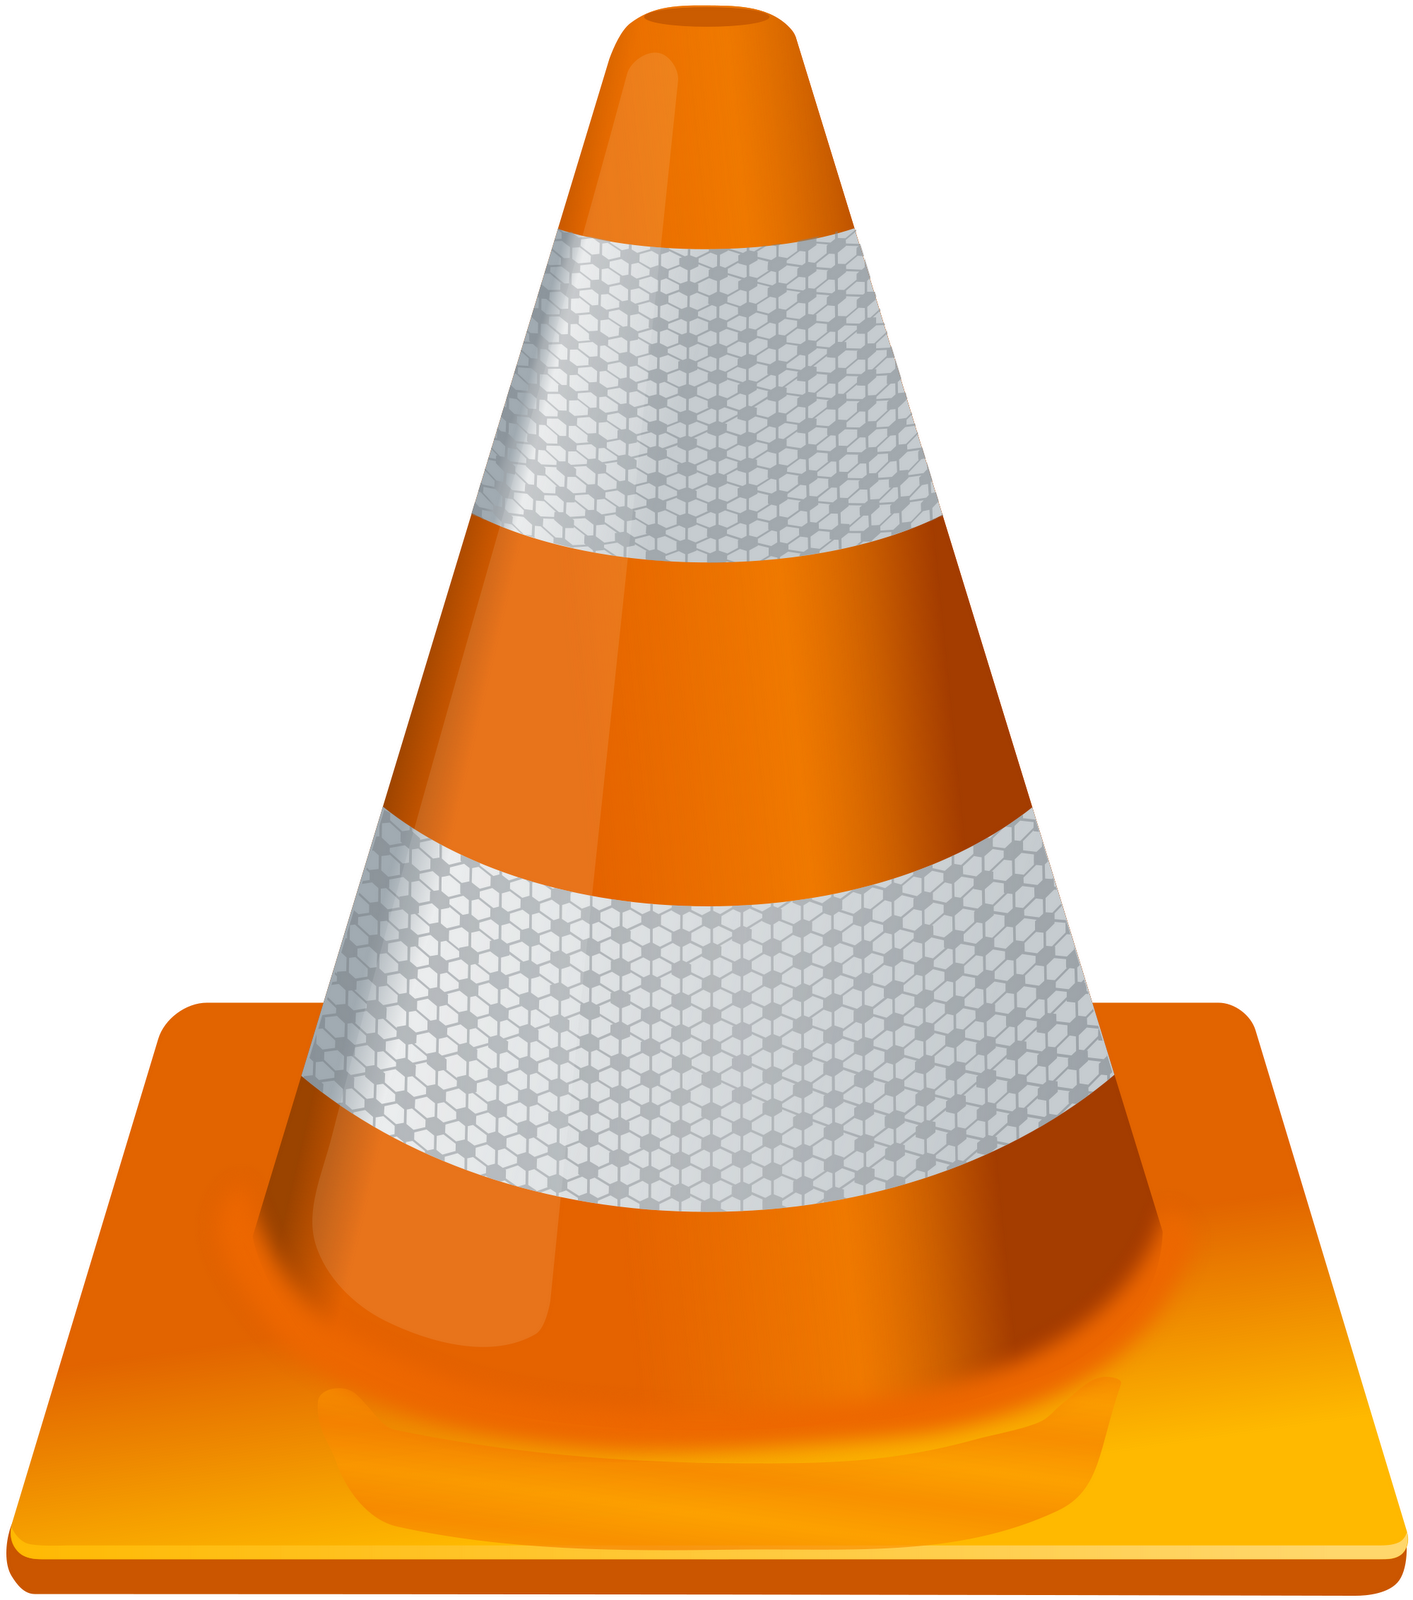 Vlc for mac os